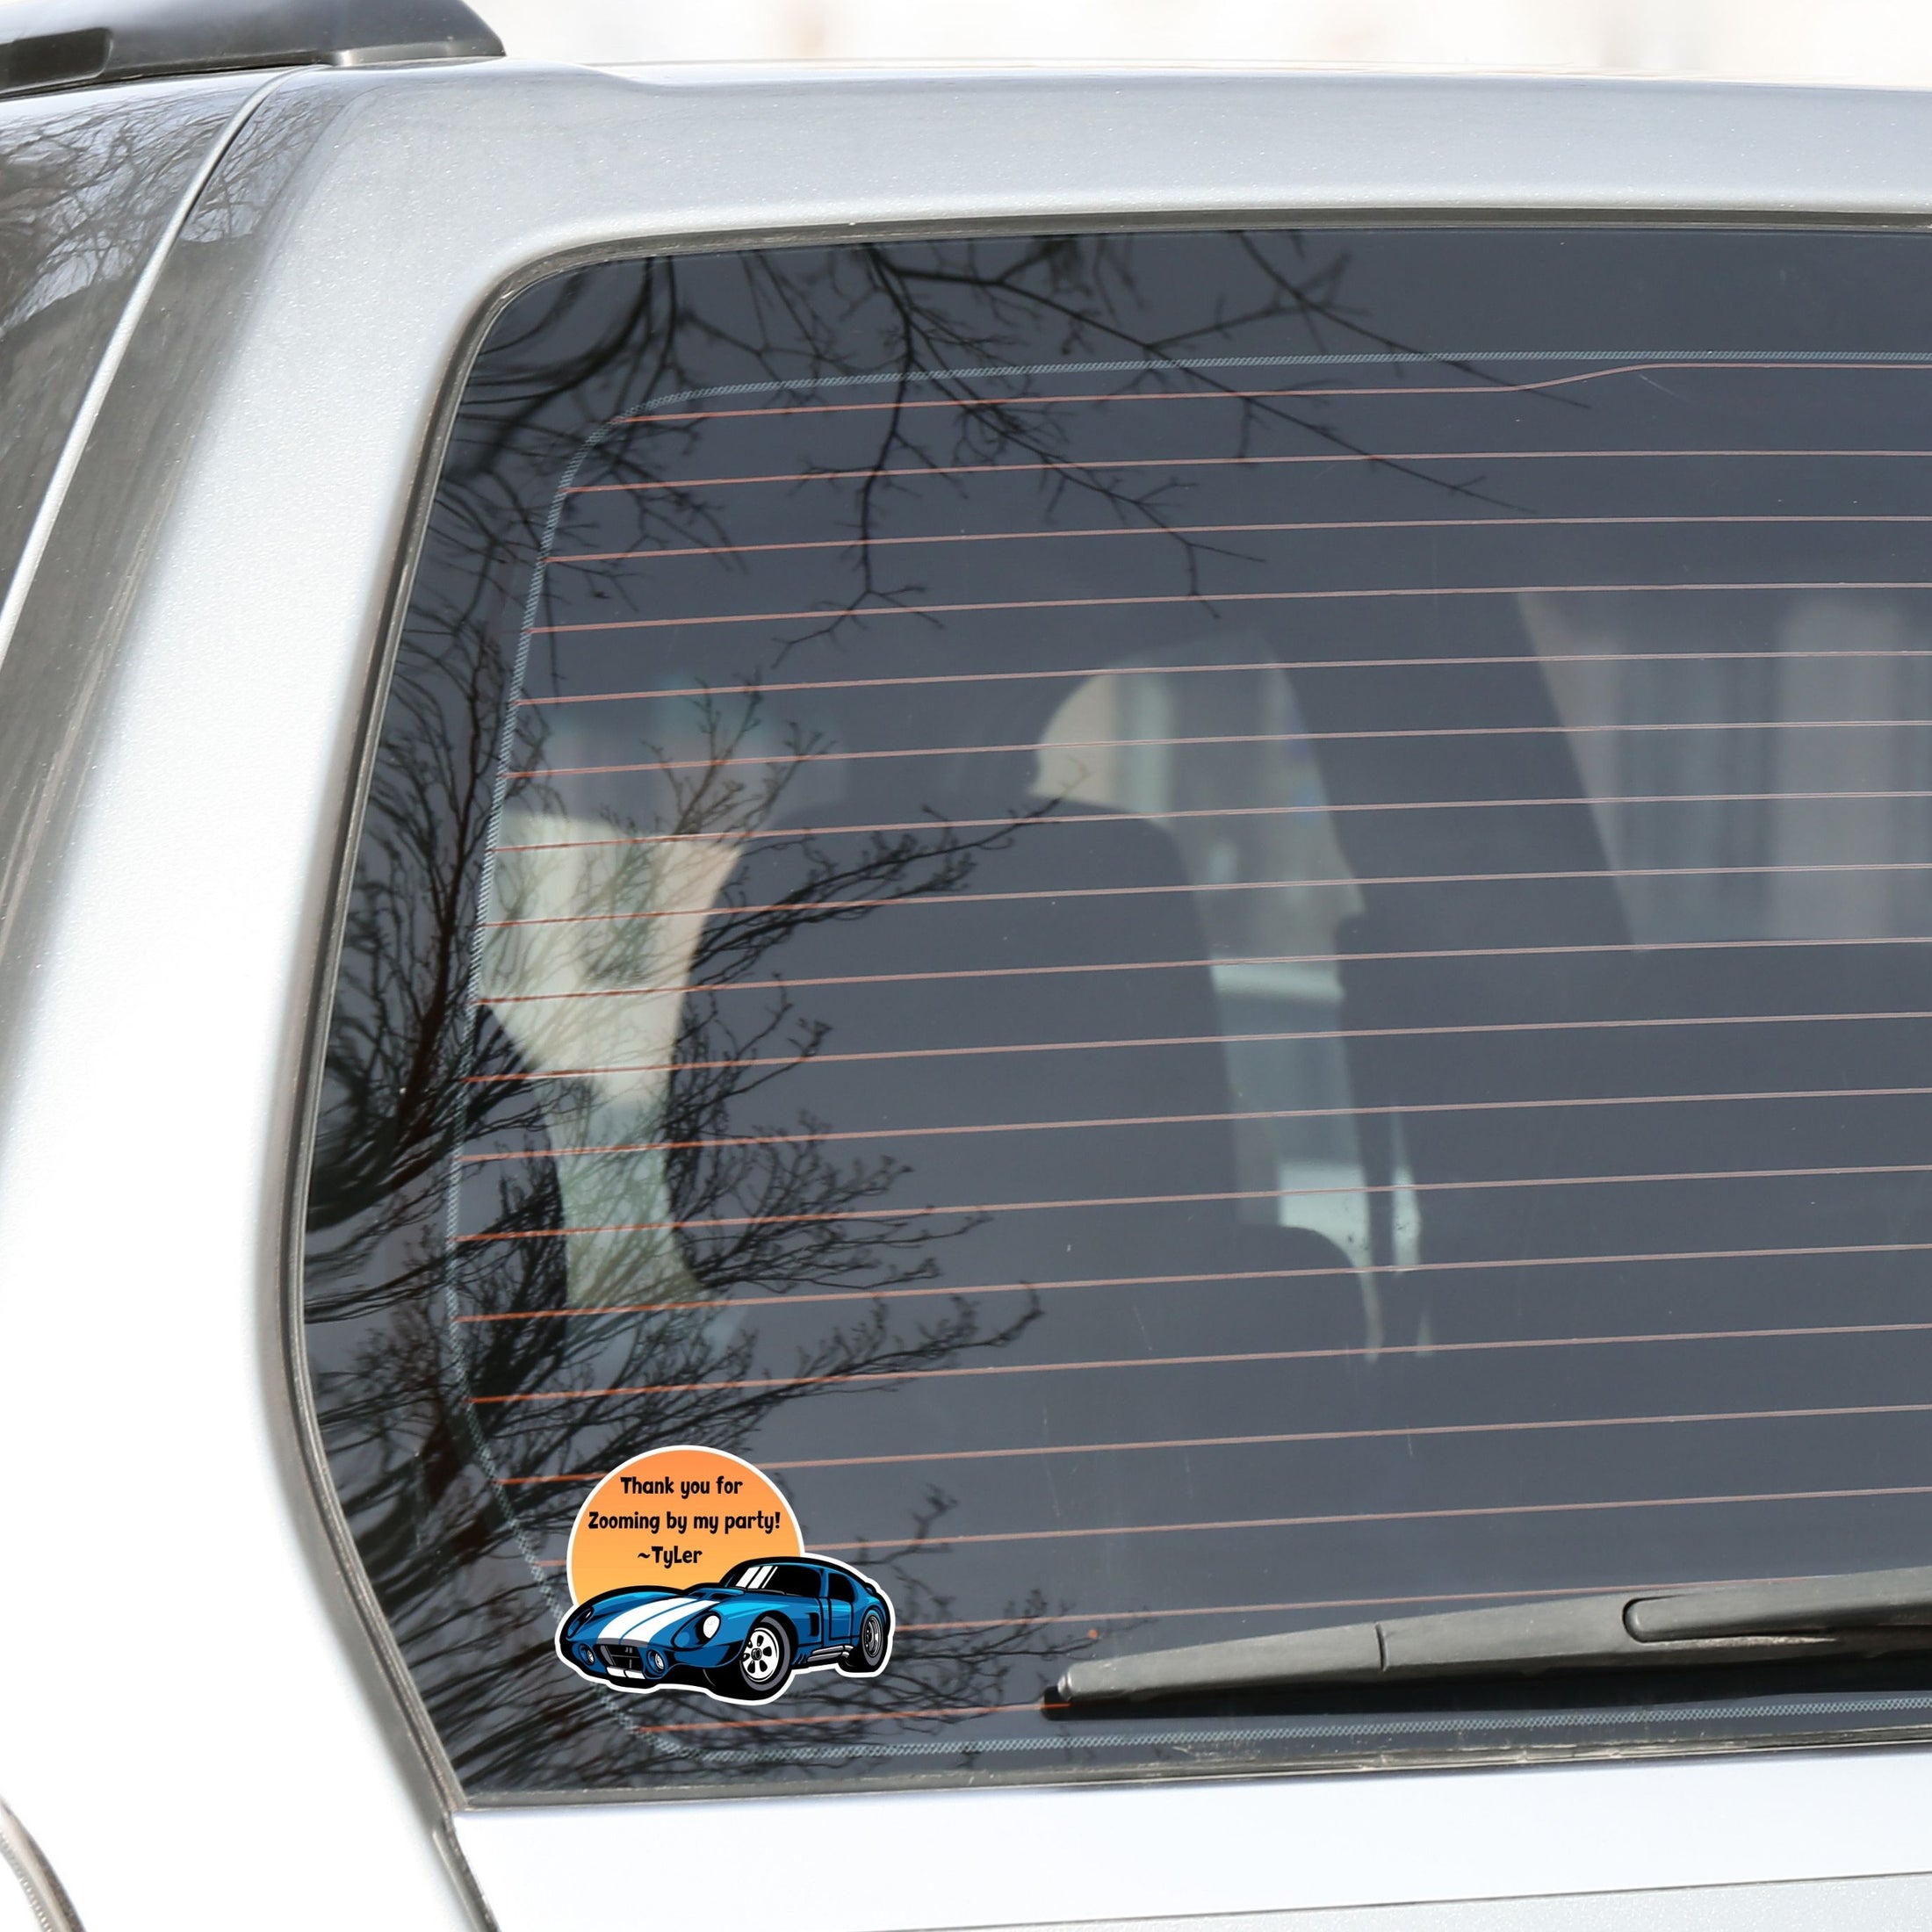 This image shows the Zooming By sticker on the back window of a car.